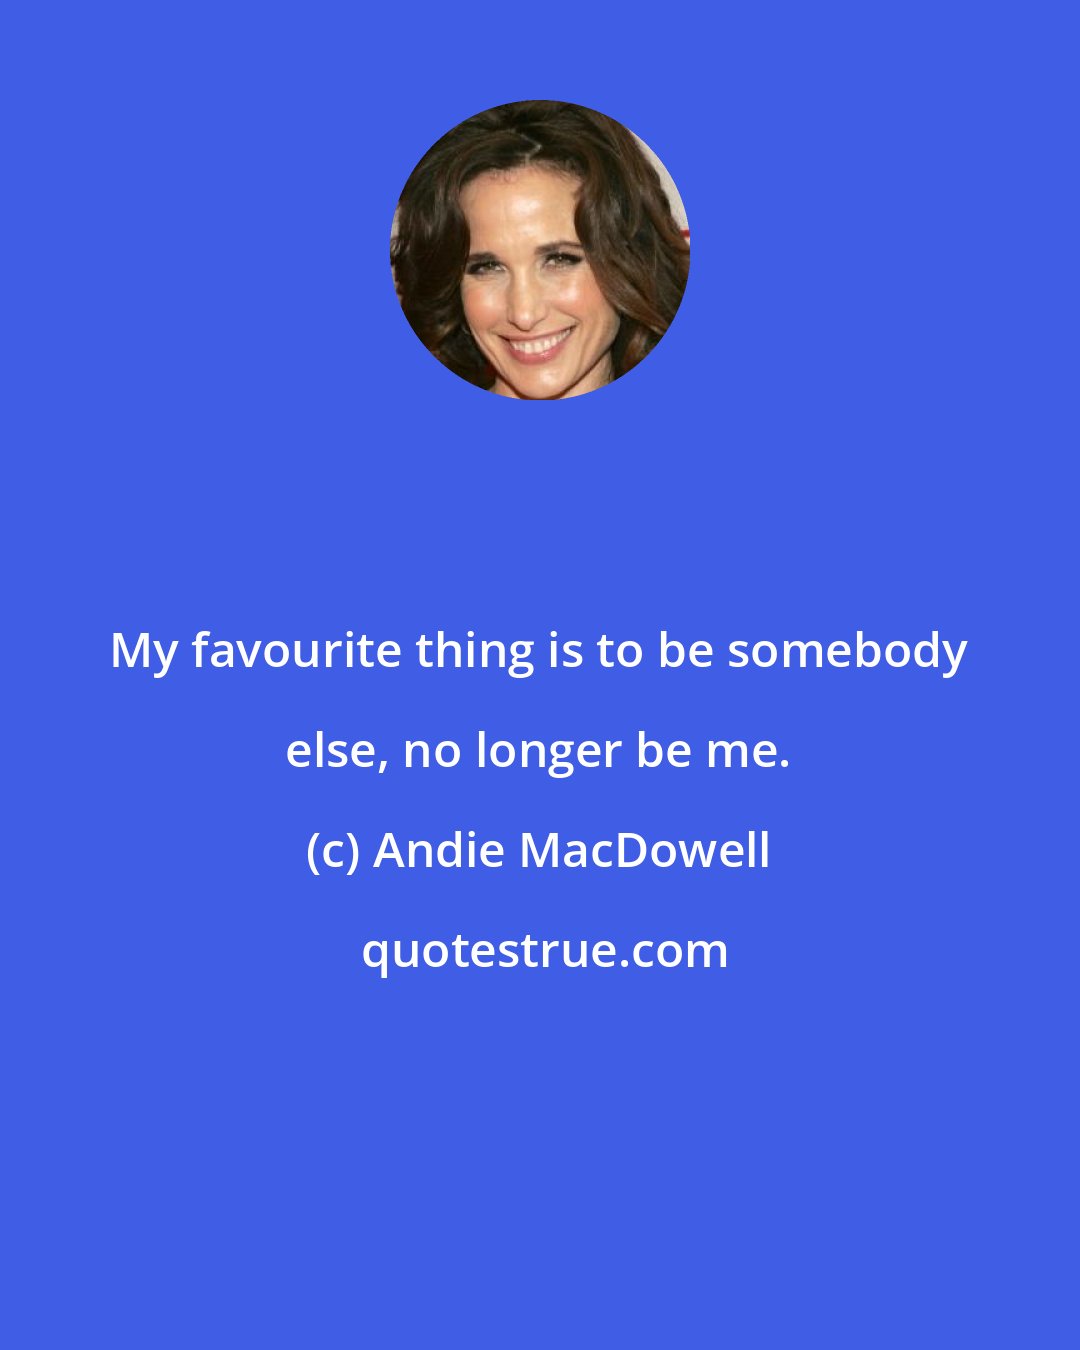 Andie MacDowell: My favourite thing is to be somebody else, no longer be me.